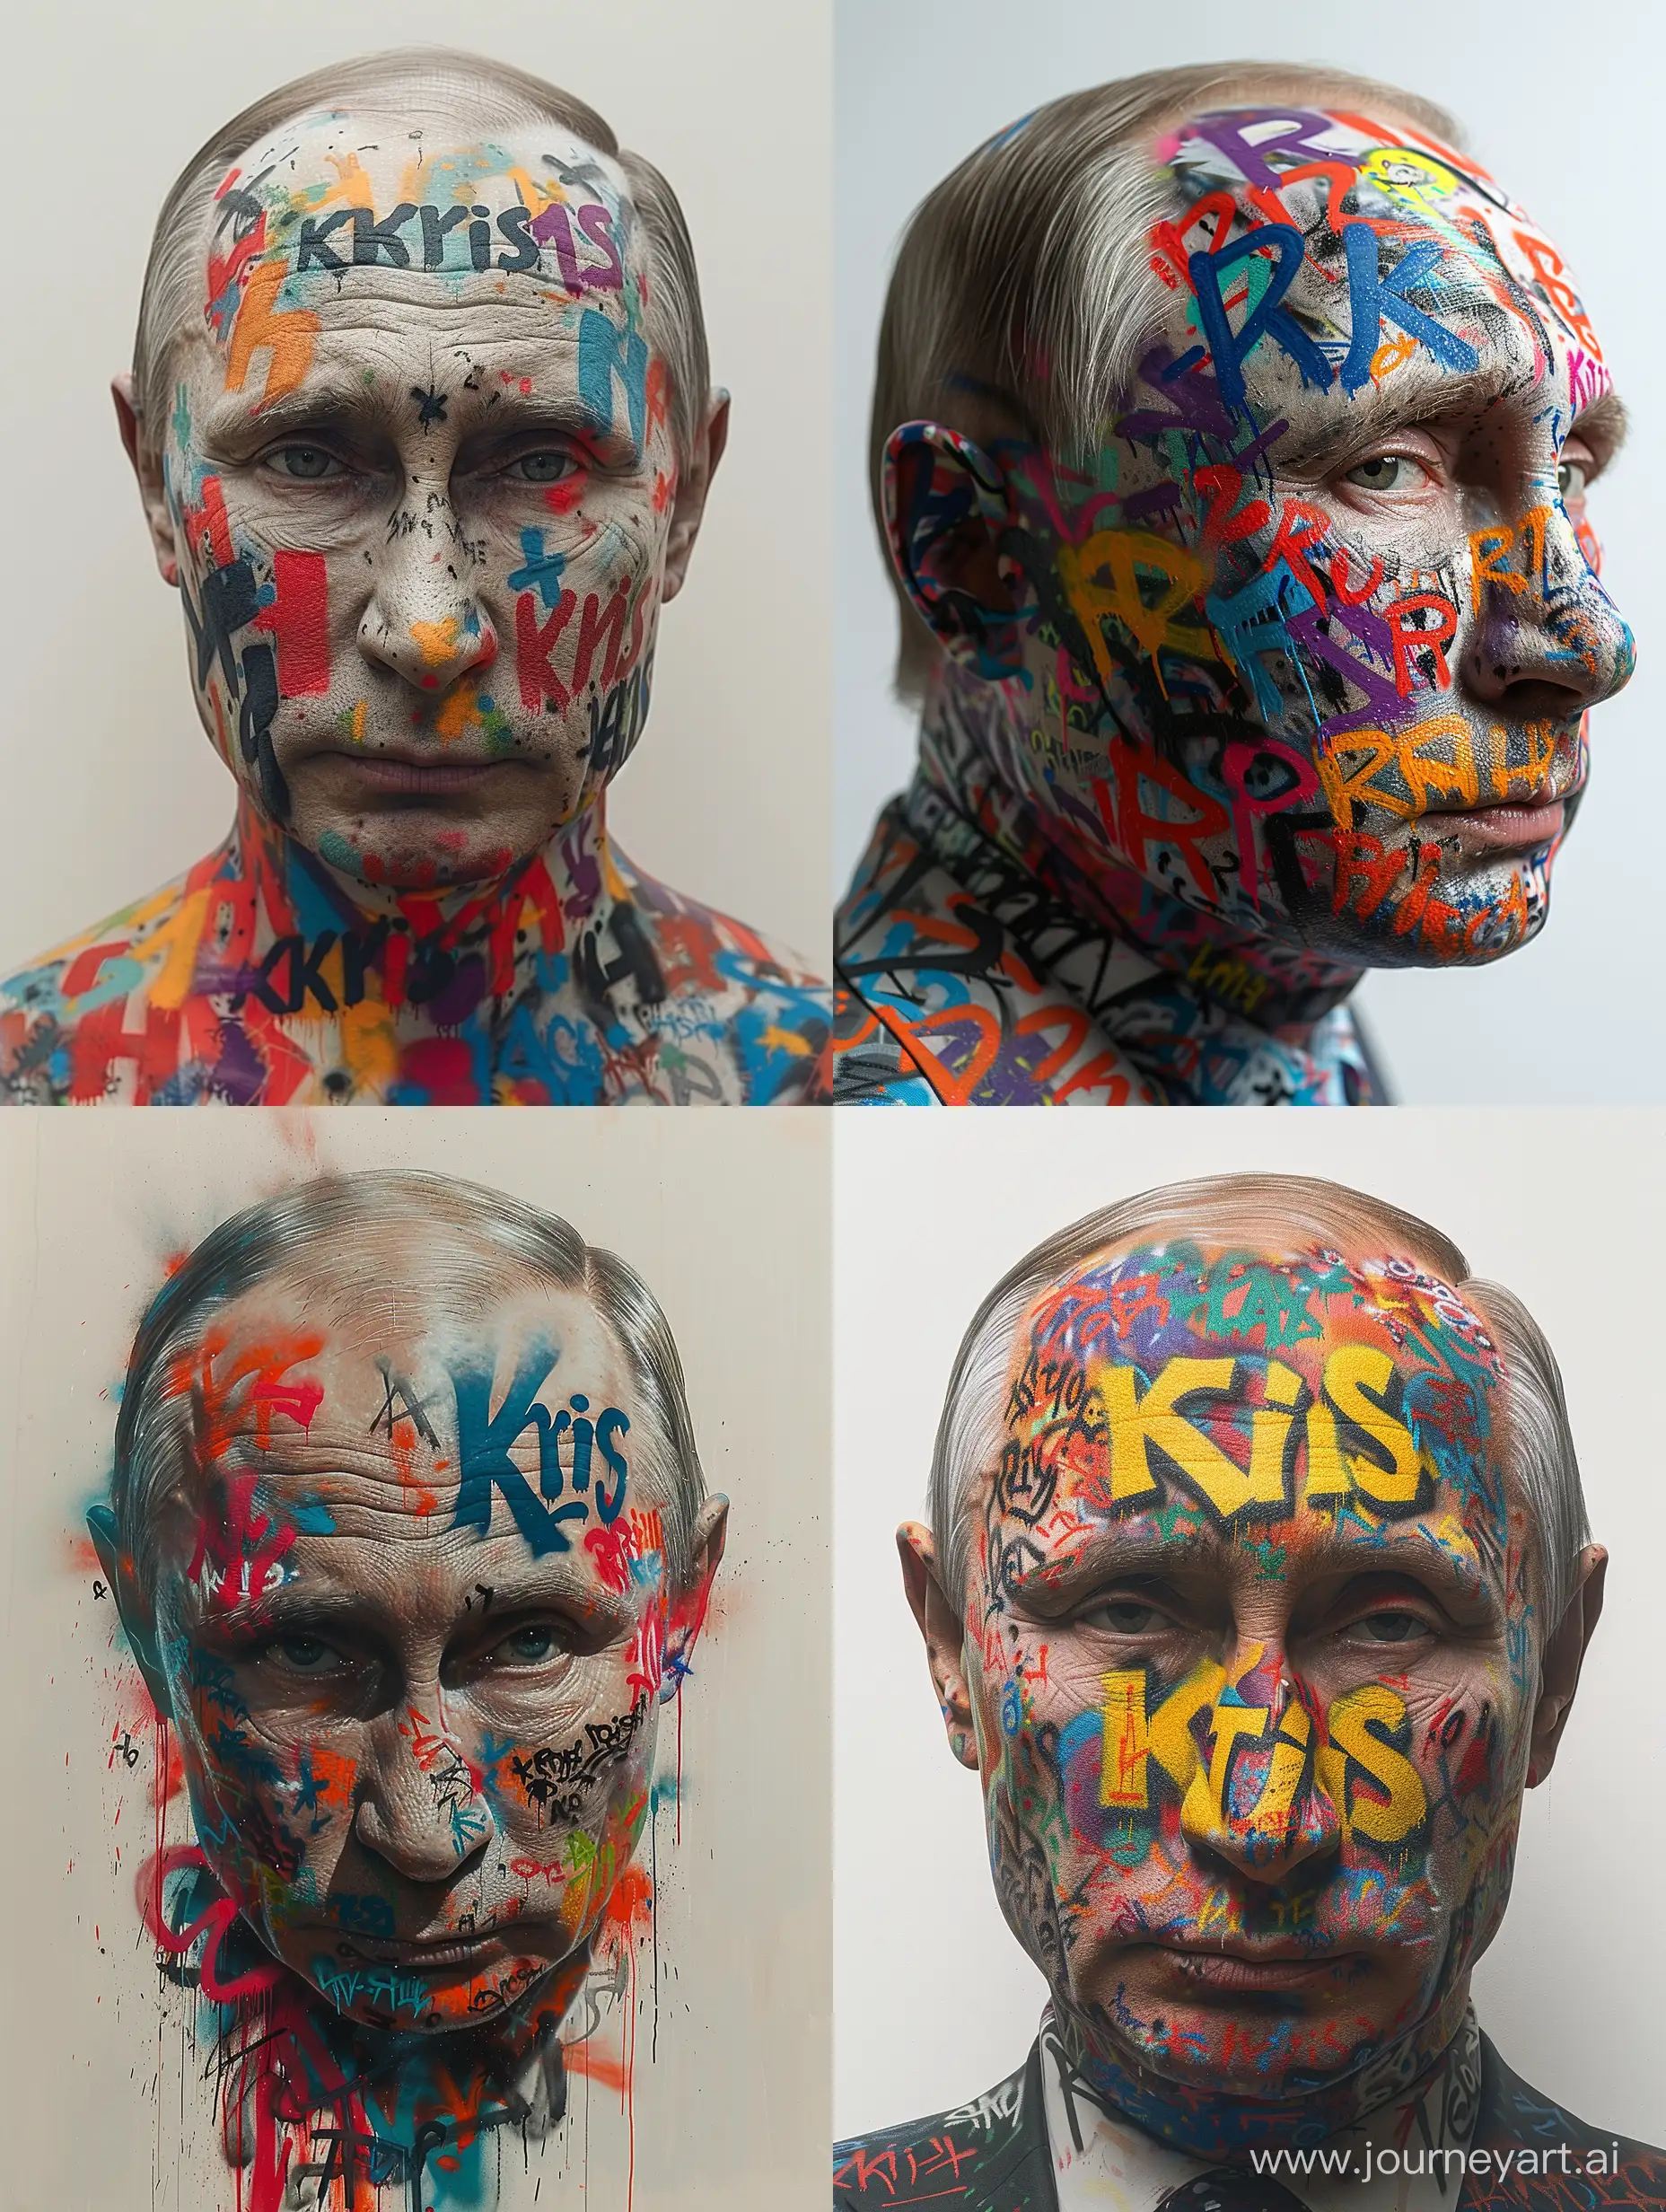 Vladimir Putin face  with wildstyle graffiti. The intricate and dynamic graffiti lettering covers all the surface, featuring bold tags, complex shapes, and bursts of contrasting colors all worded "Krish". The minimalist white backdrop enhances the focus on the graffiti-covered putin, creating a visually dynamic and thought-provoking composition. The clash of putin  with the energetic chaos of wildstyle graffiti symbolizes the intersection of political expression and contemporary urban culture in a clean and minimalist setting --ar 3:4 --stylize 1000 --v 6